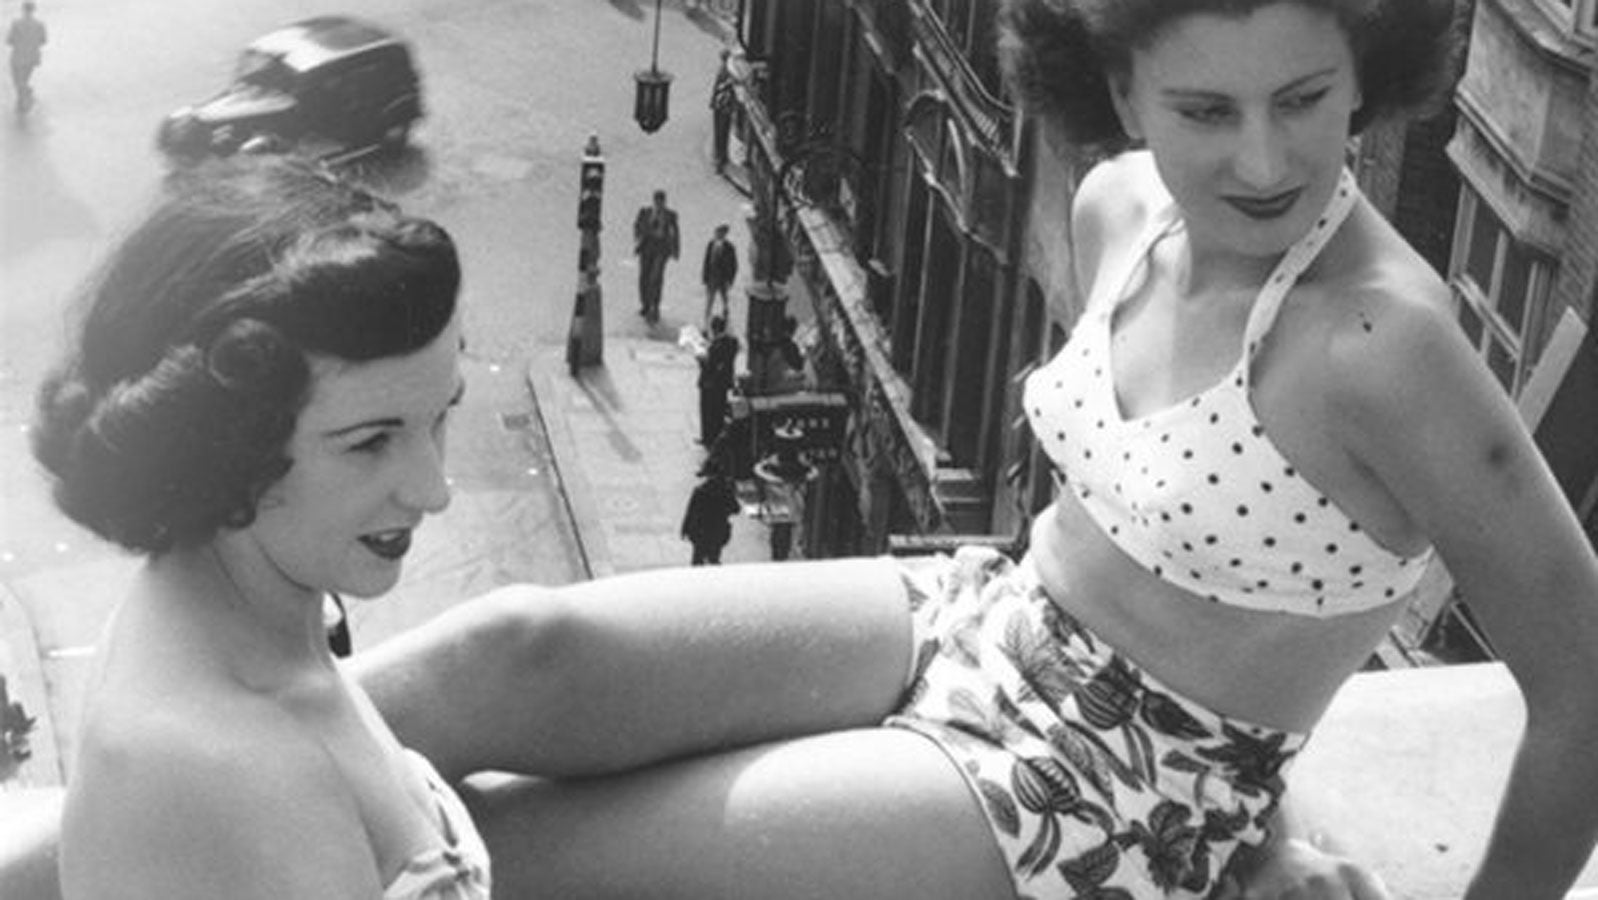 Two girls in bikinis on a rooftop/balcony in London in the 1940s